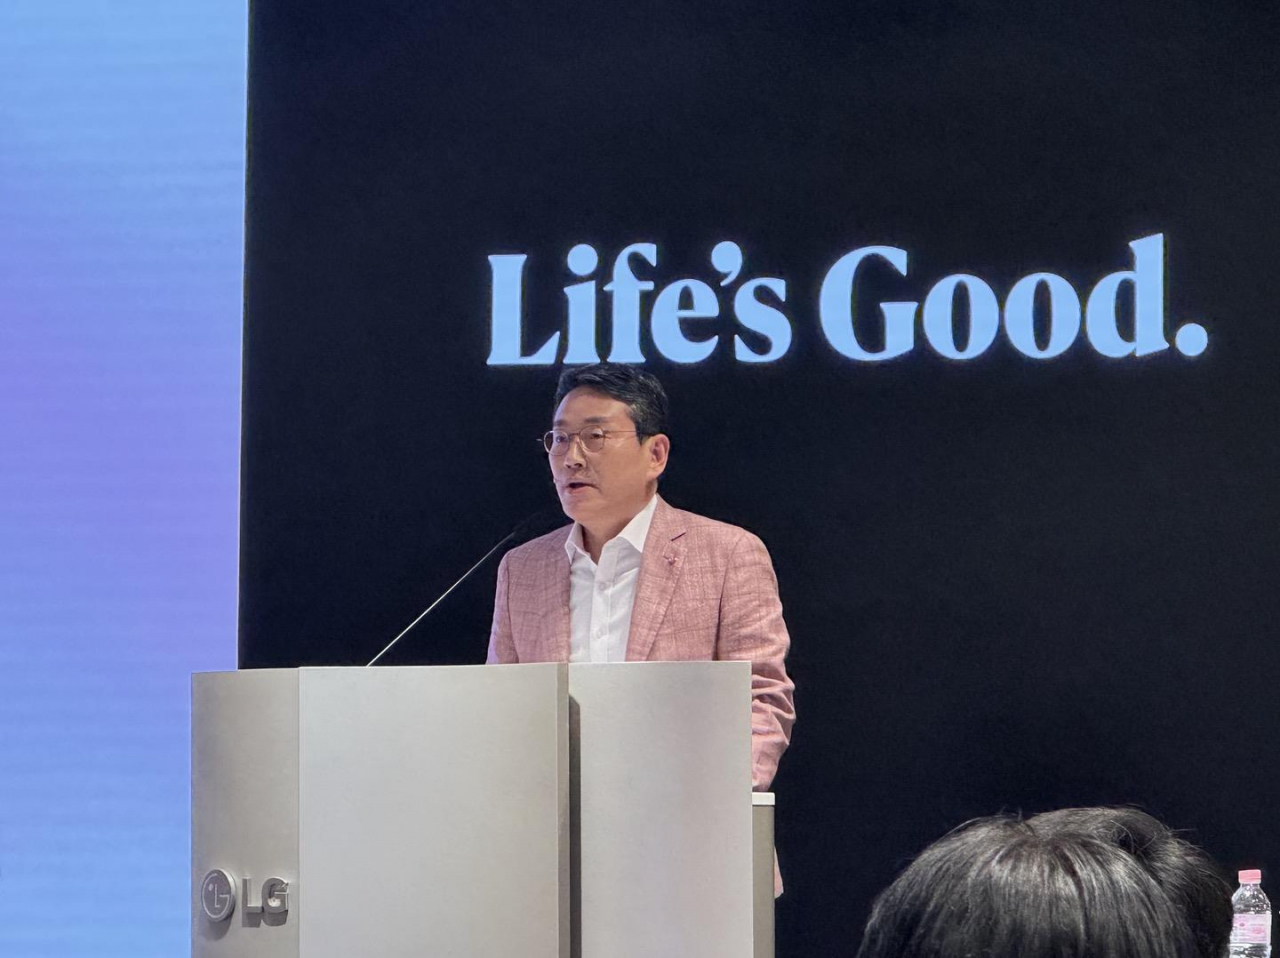 LG Electronics Chief Executive Officer Cho Joo-wan speaks at a general shareholders meeting held in LG Twin Towers in Seoul on Tuesday. (Yonhap)